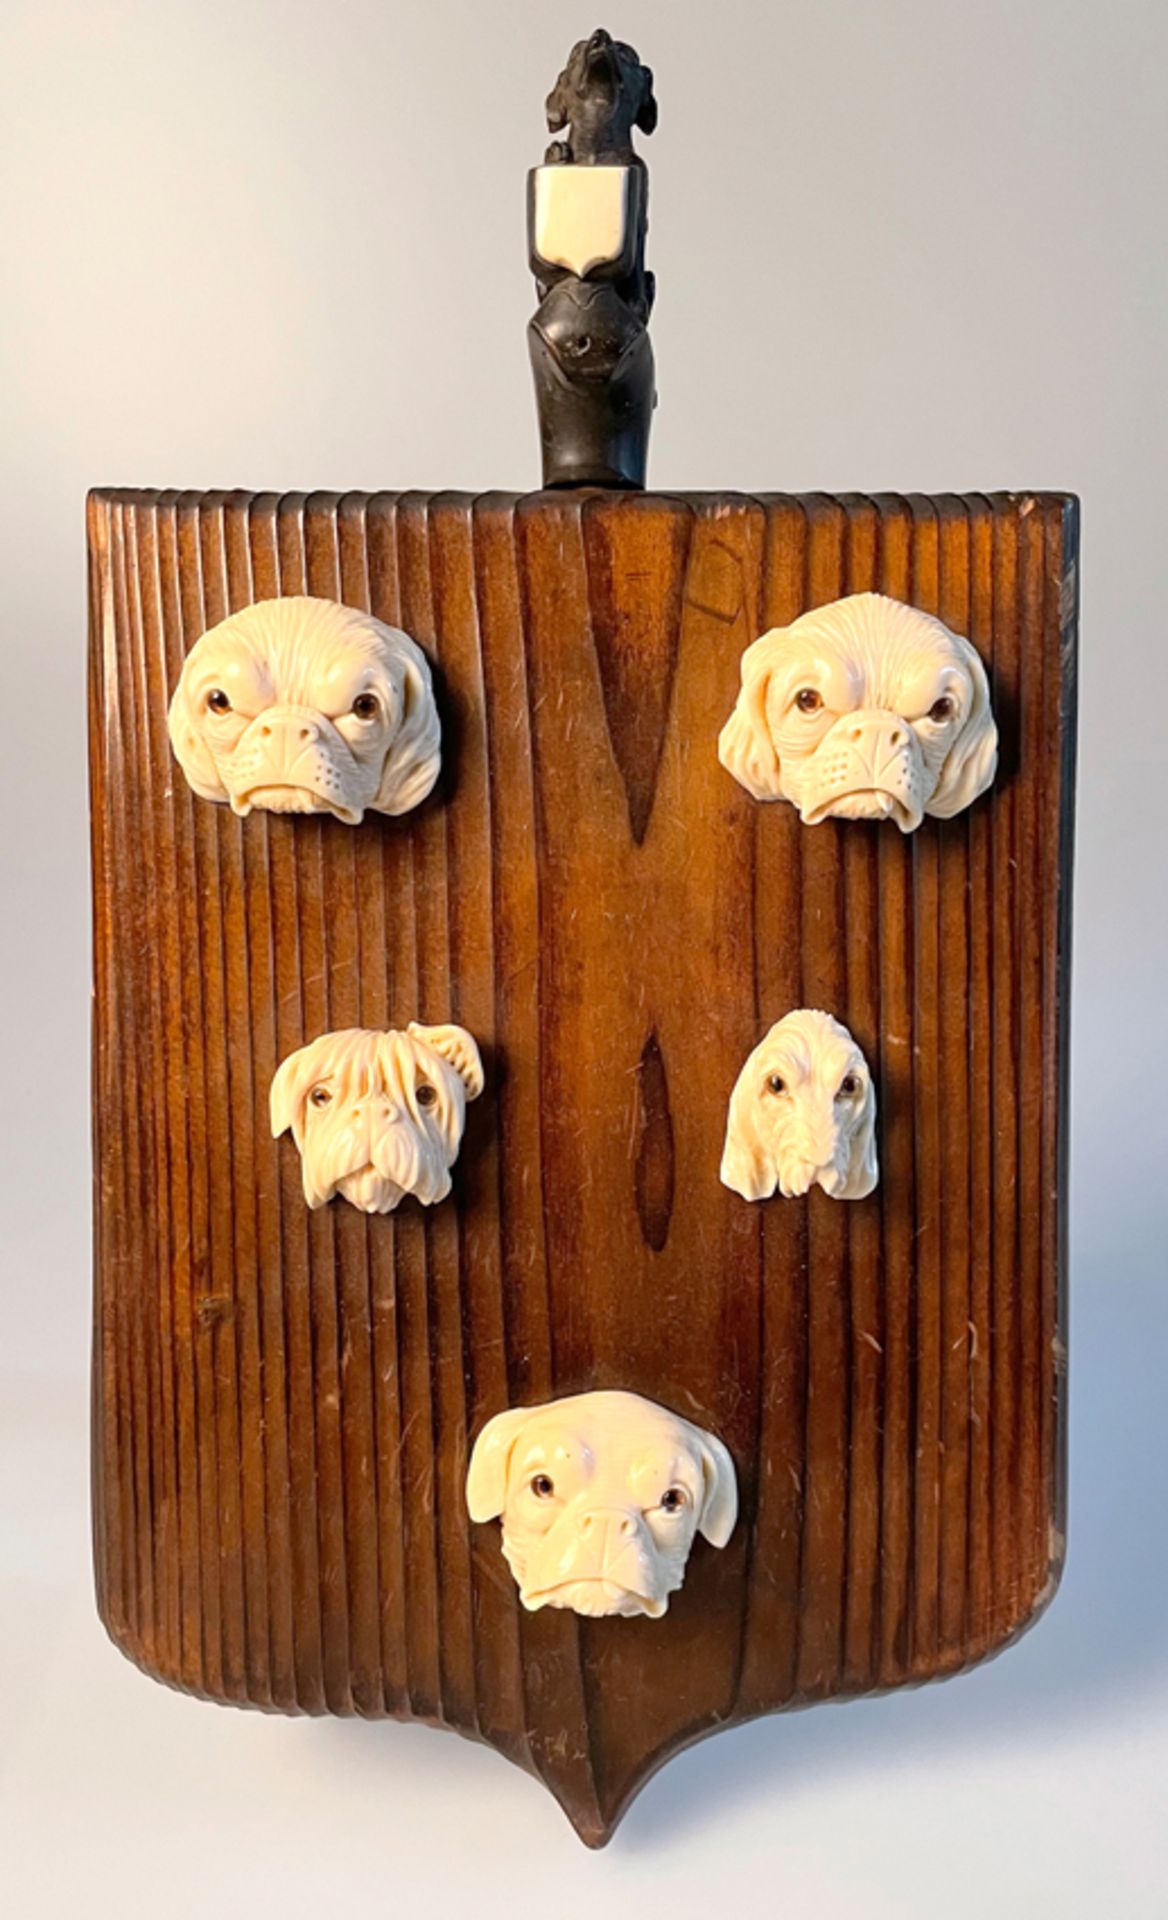 "Canine portraits". Ivory sculptures. England. 19th century.